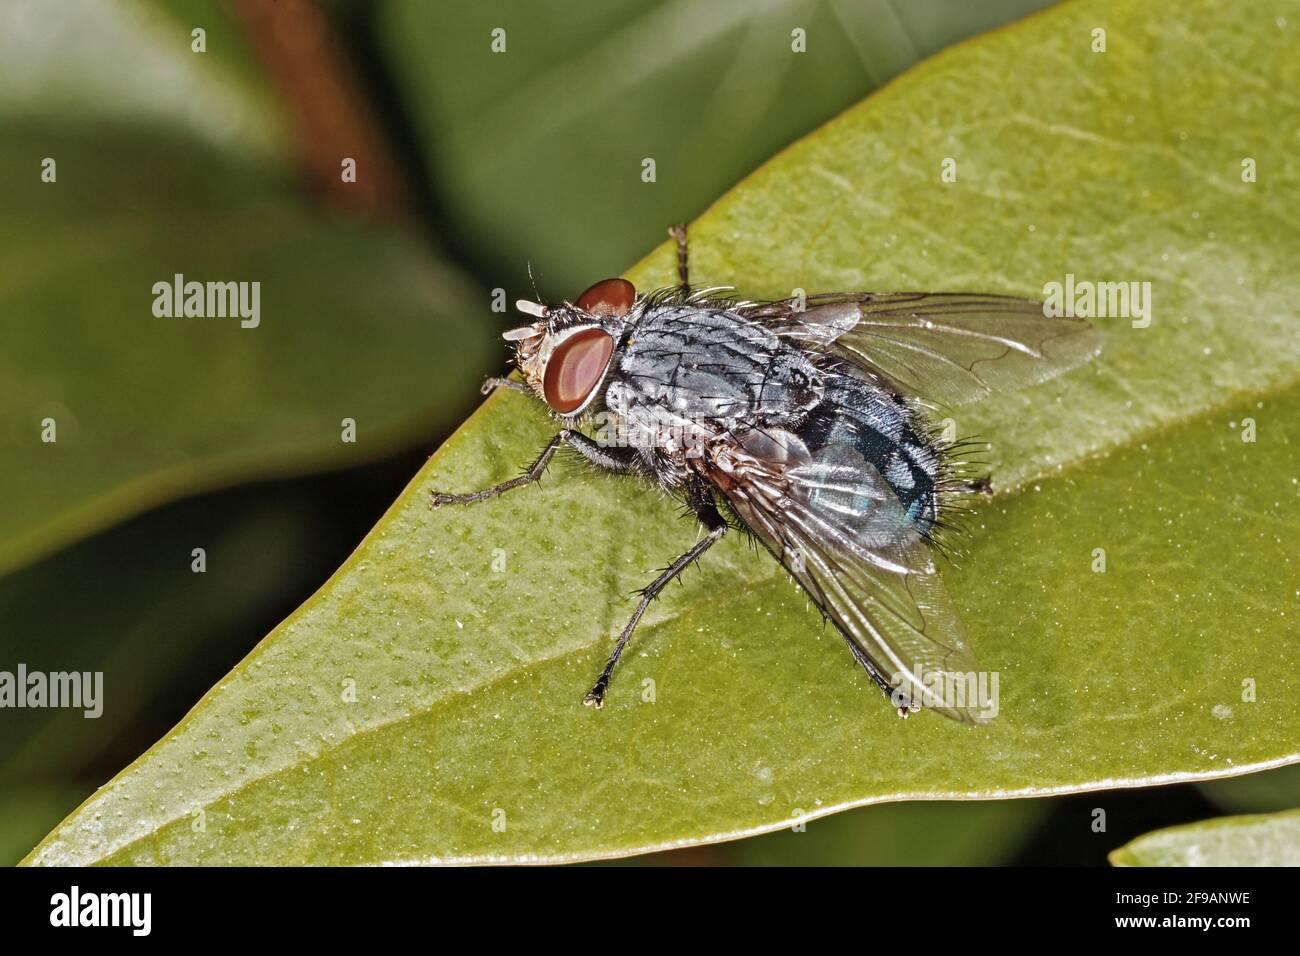 housefly on a leaf, Musca domestica, Muscidae Stock Photo